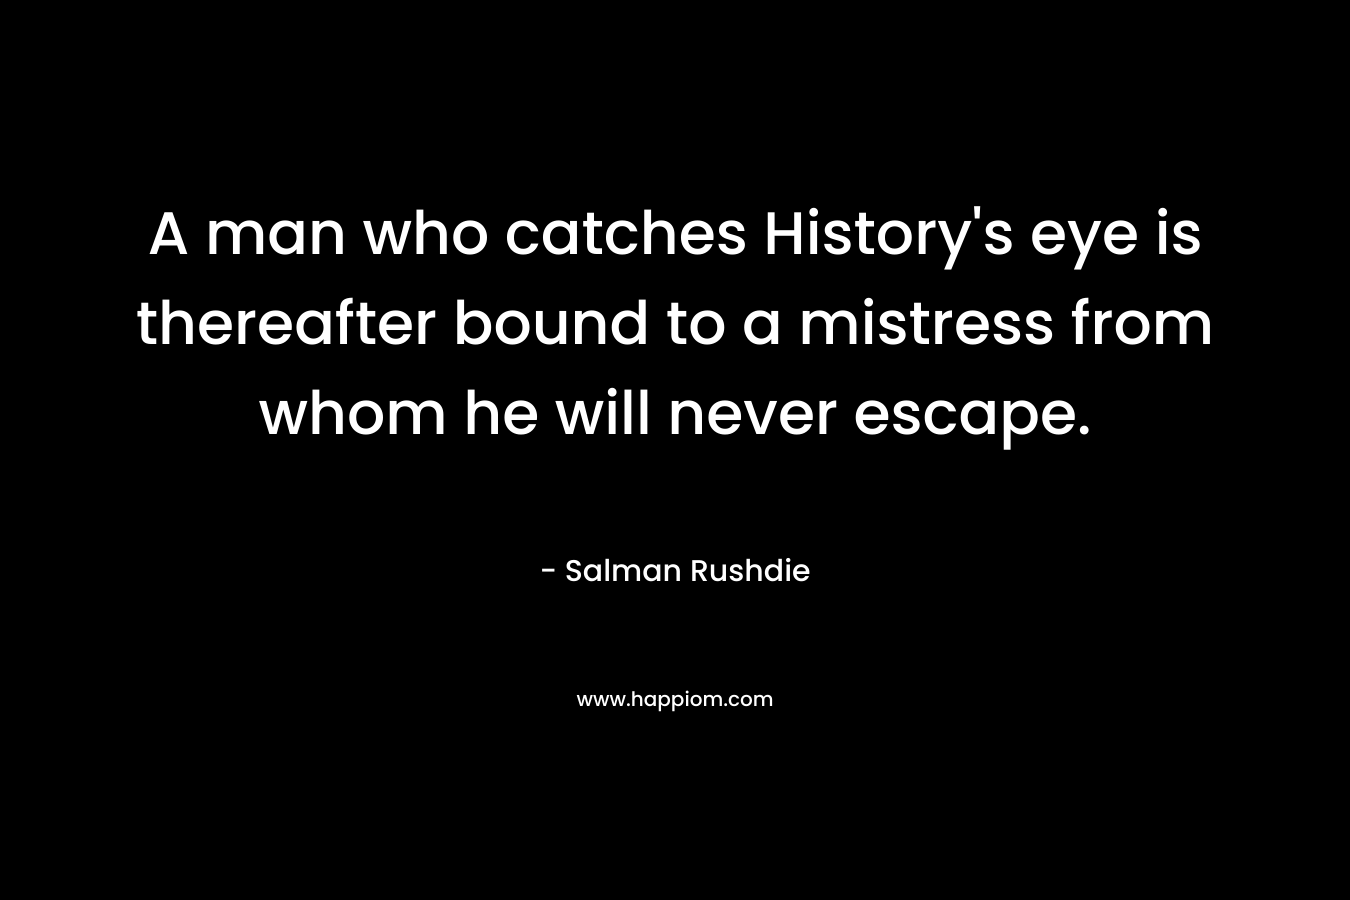 A man who catches History’s eye is thereafter bound to a mistress from whom he will never escape. – Salman Rushdie